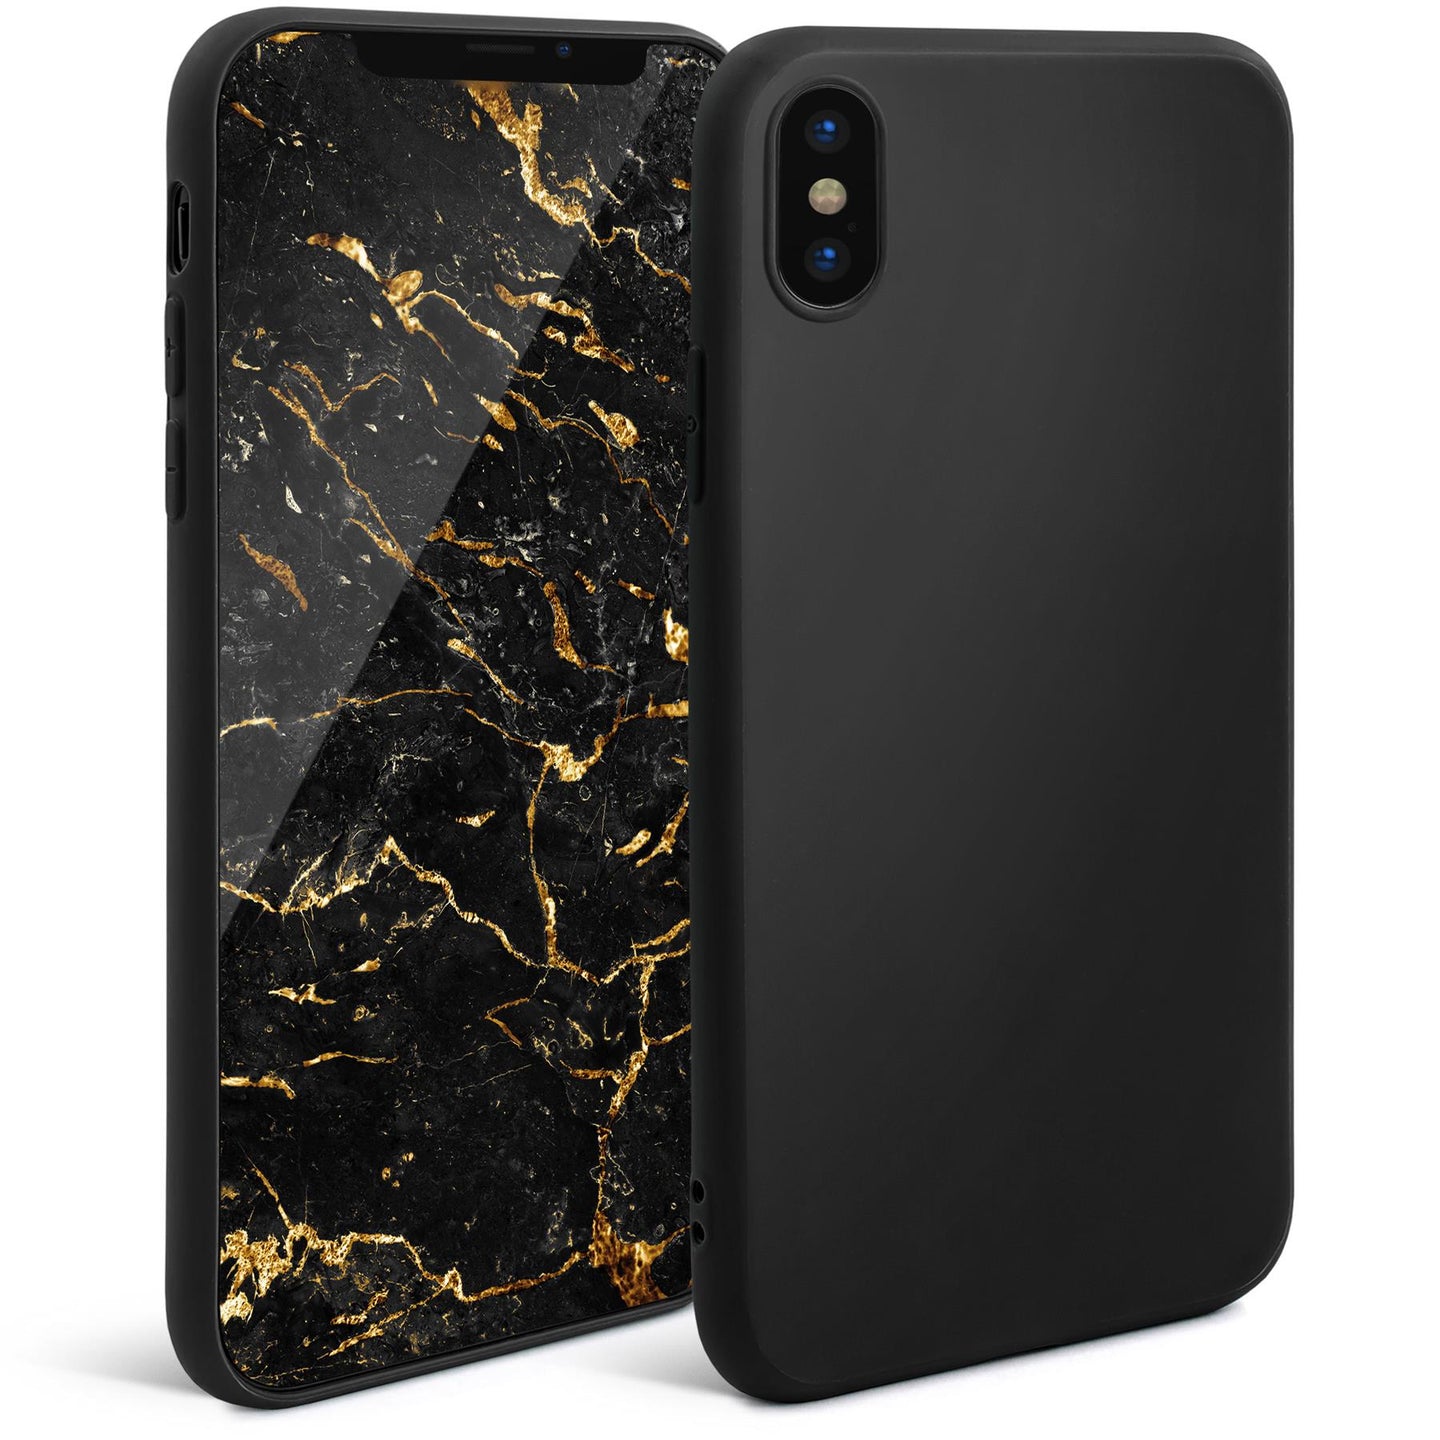 Moozy Minimalist Series Silicone Case for iPhone X and iPhone XS, Black - Matte Finish Slim Soft TPU Cover